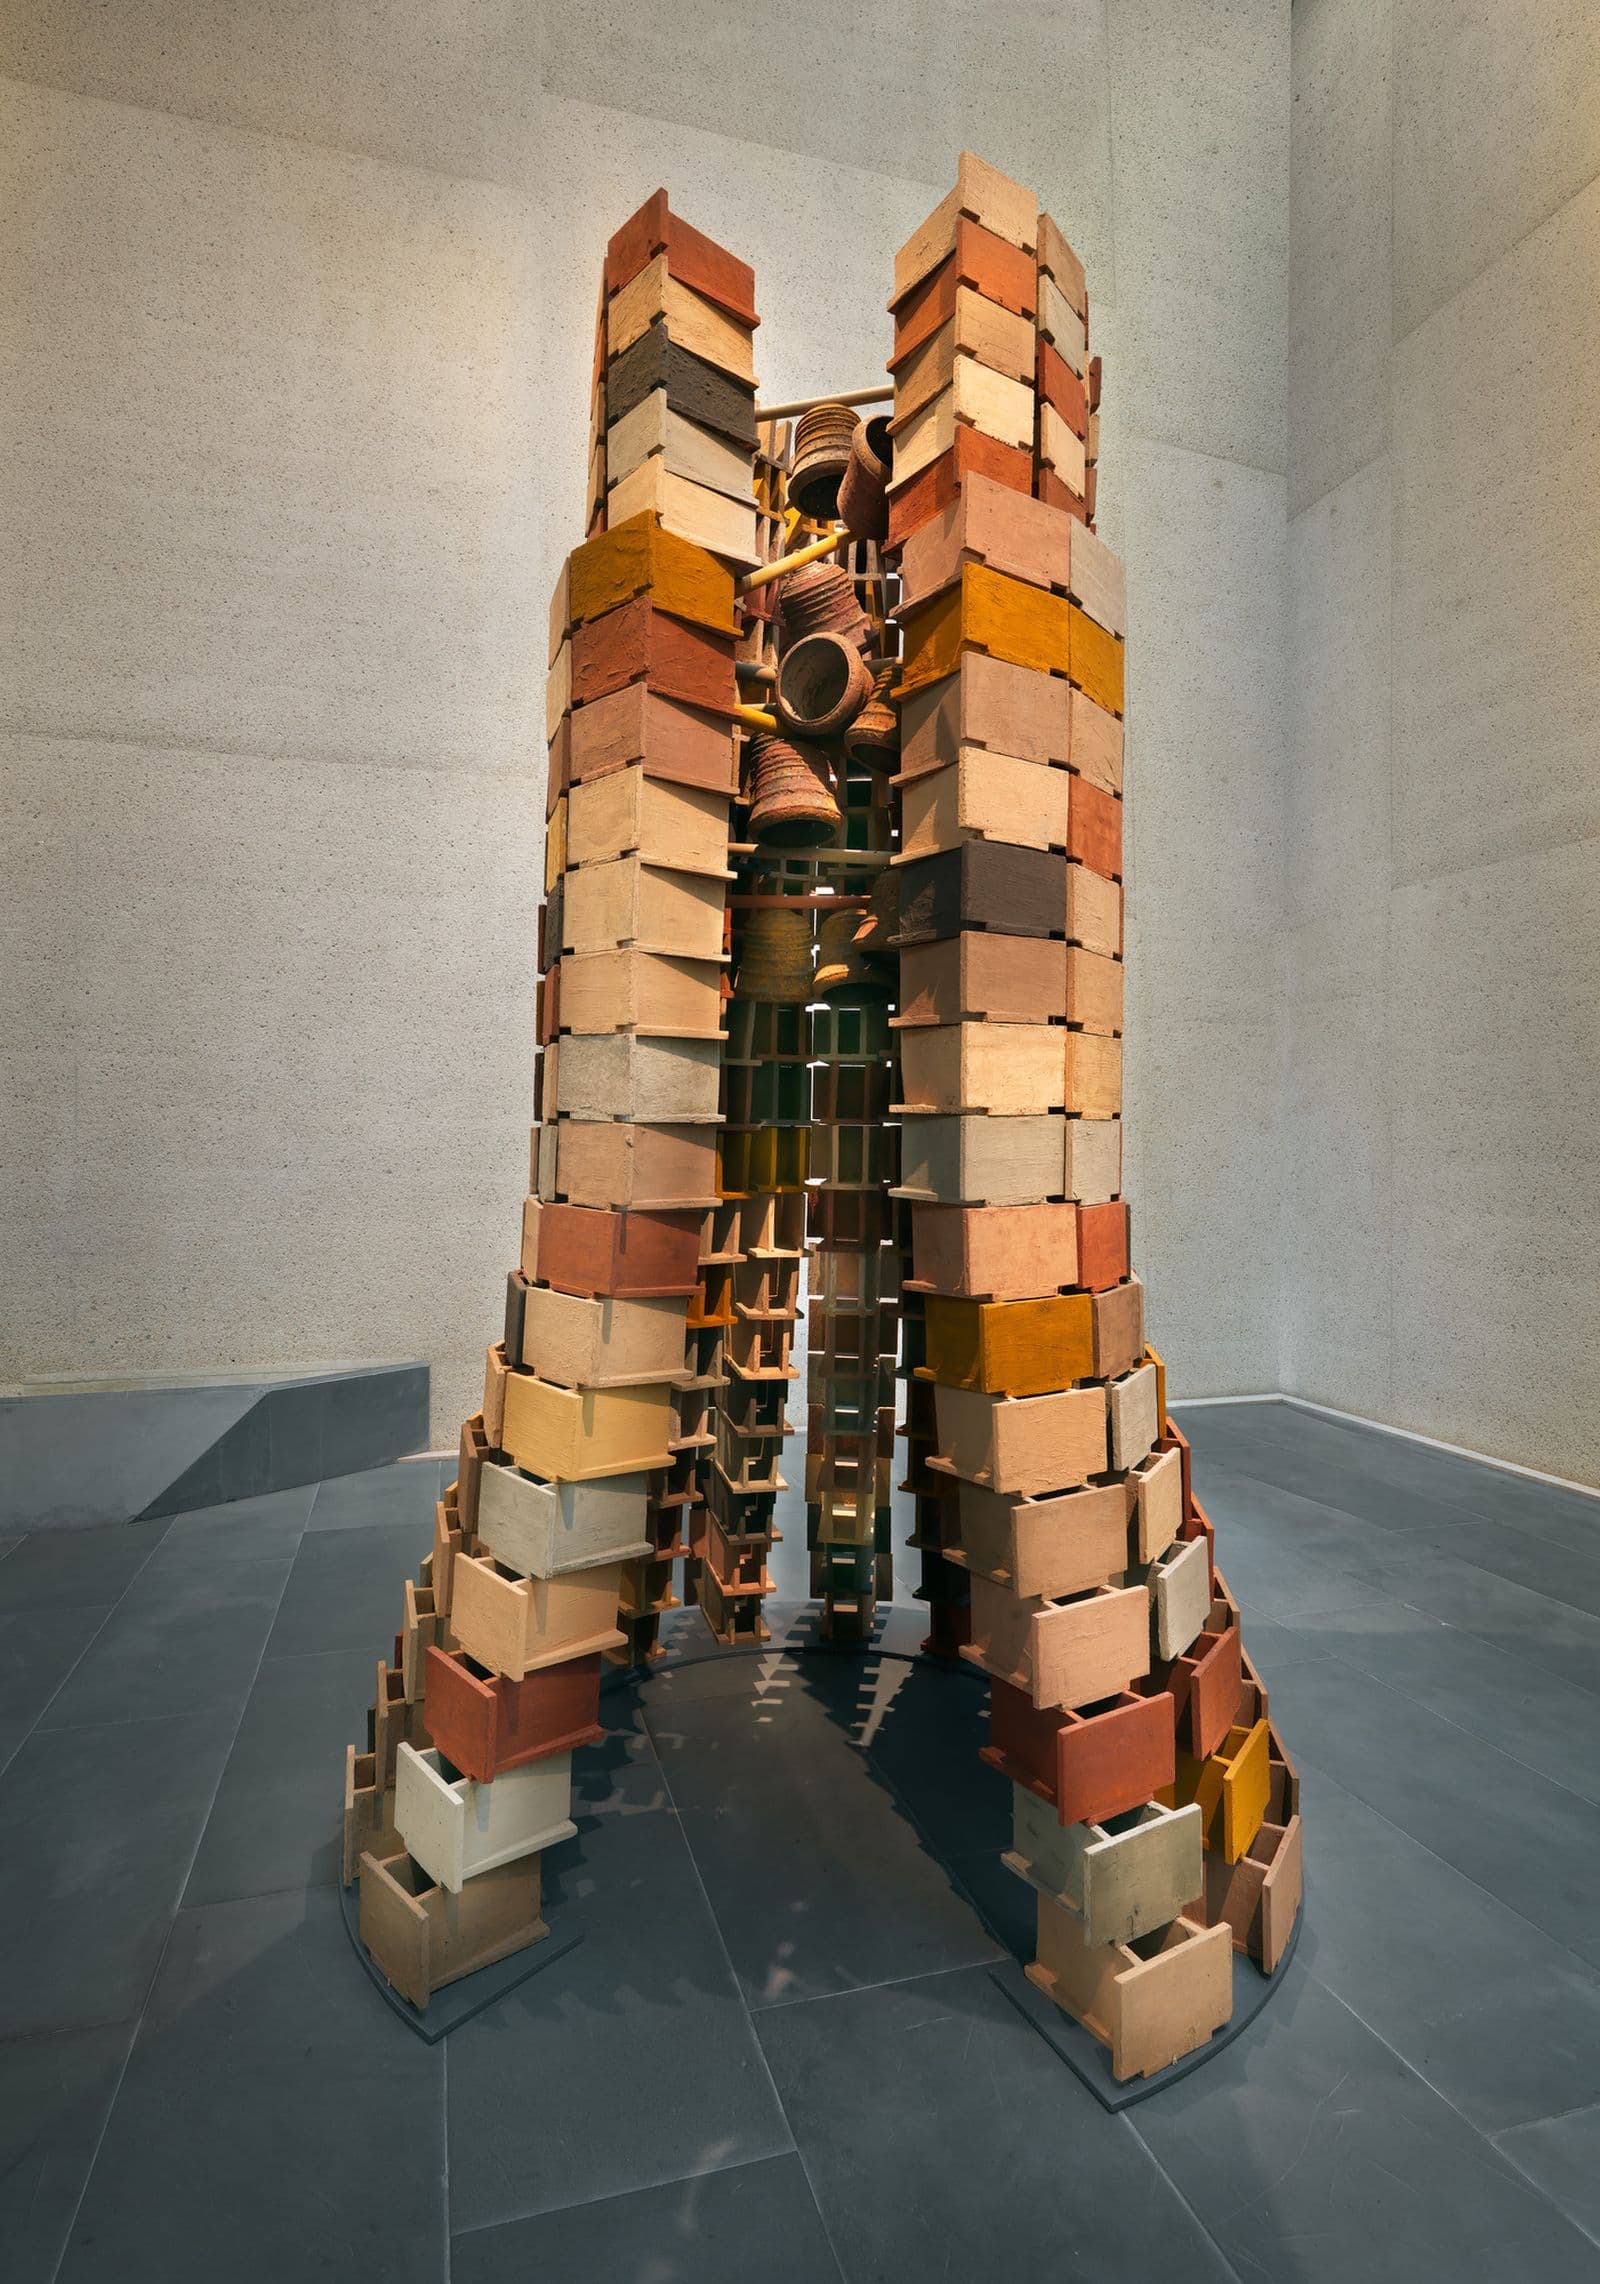 Large sculptural work of stacked wood, brass bells, and medicinal herbs